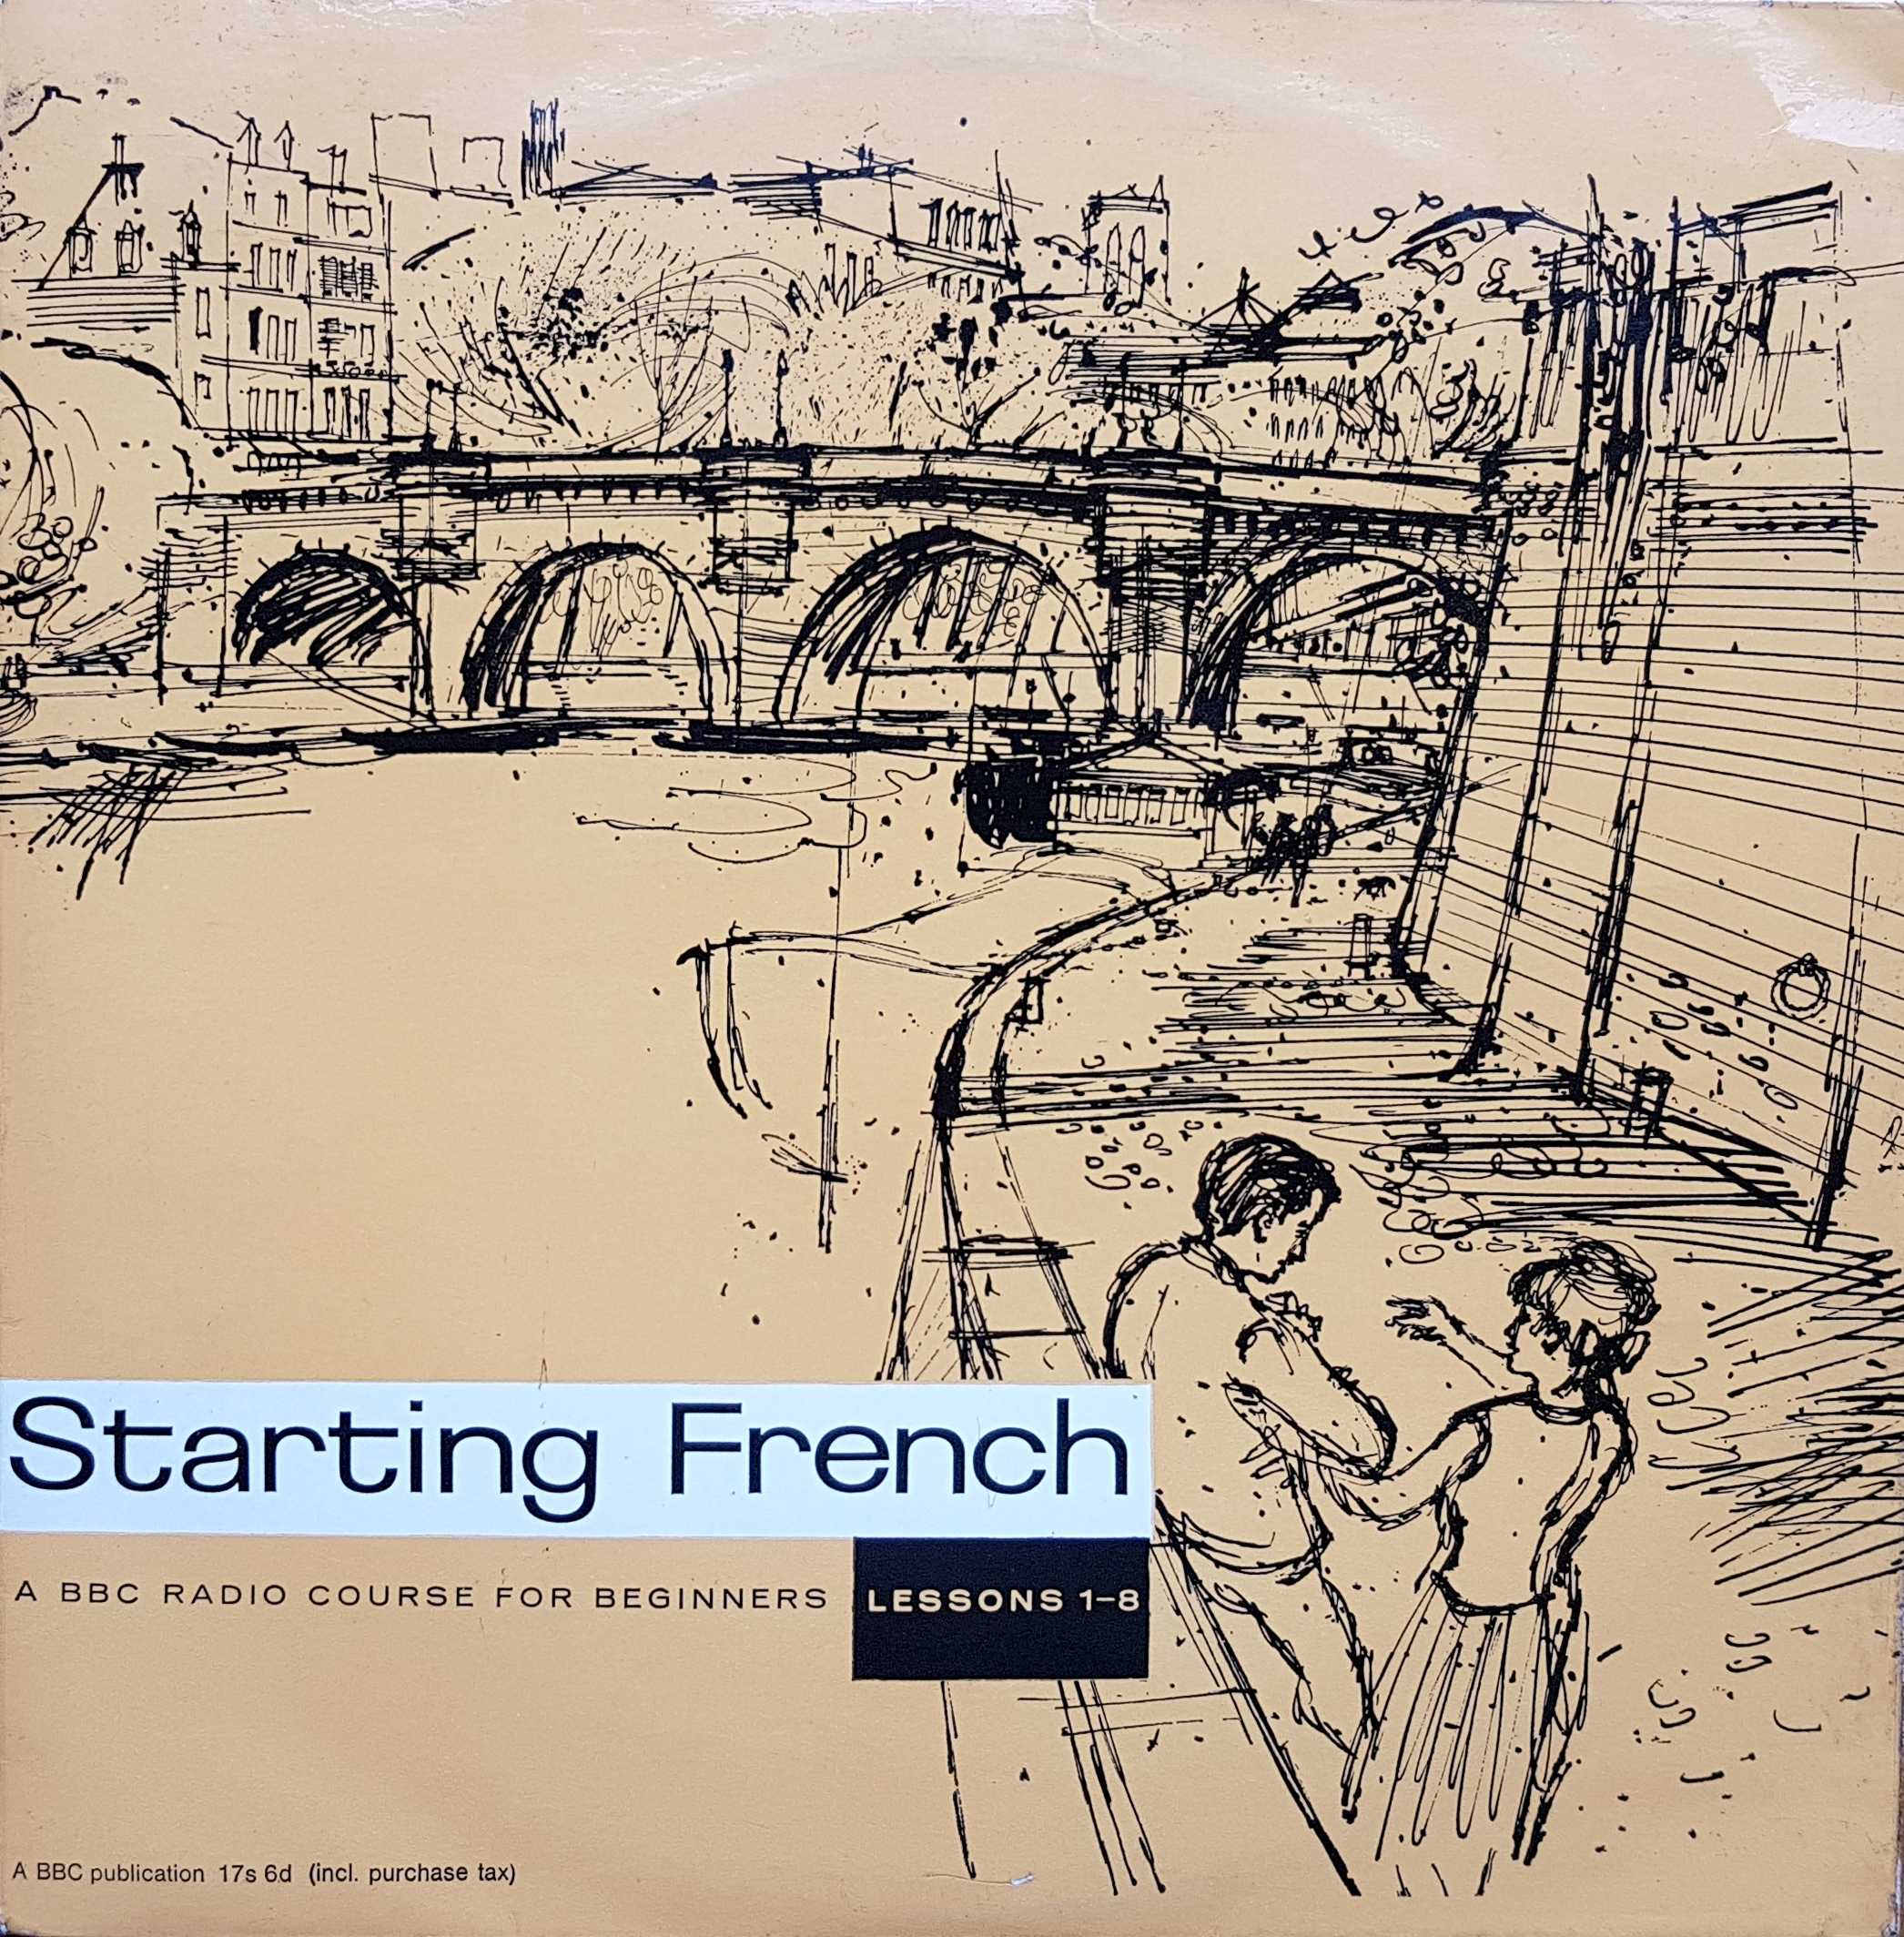 Picture of Starting French - Parts 1 - 8 by artist Elsie Ferguson from the BBC albums - Records and Tapes library